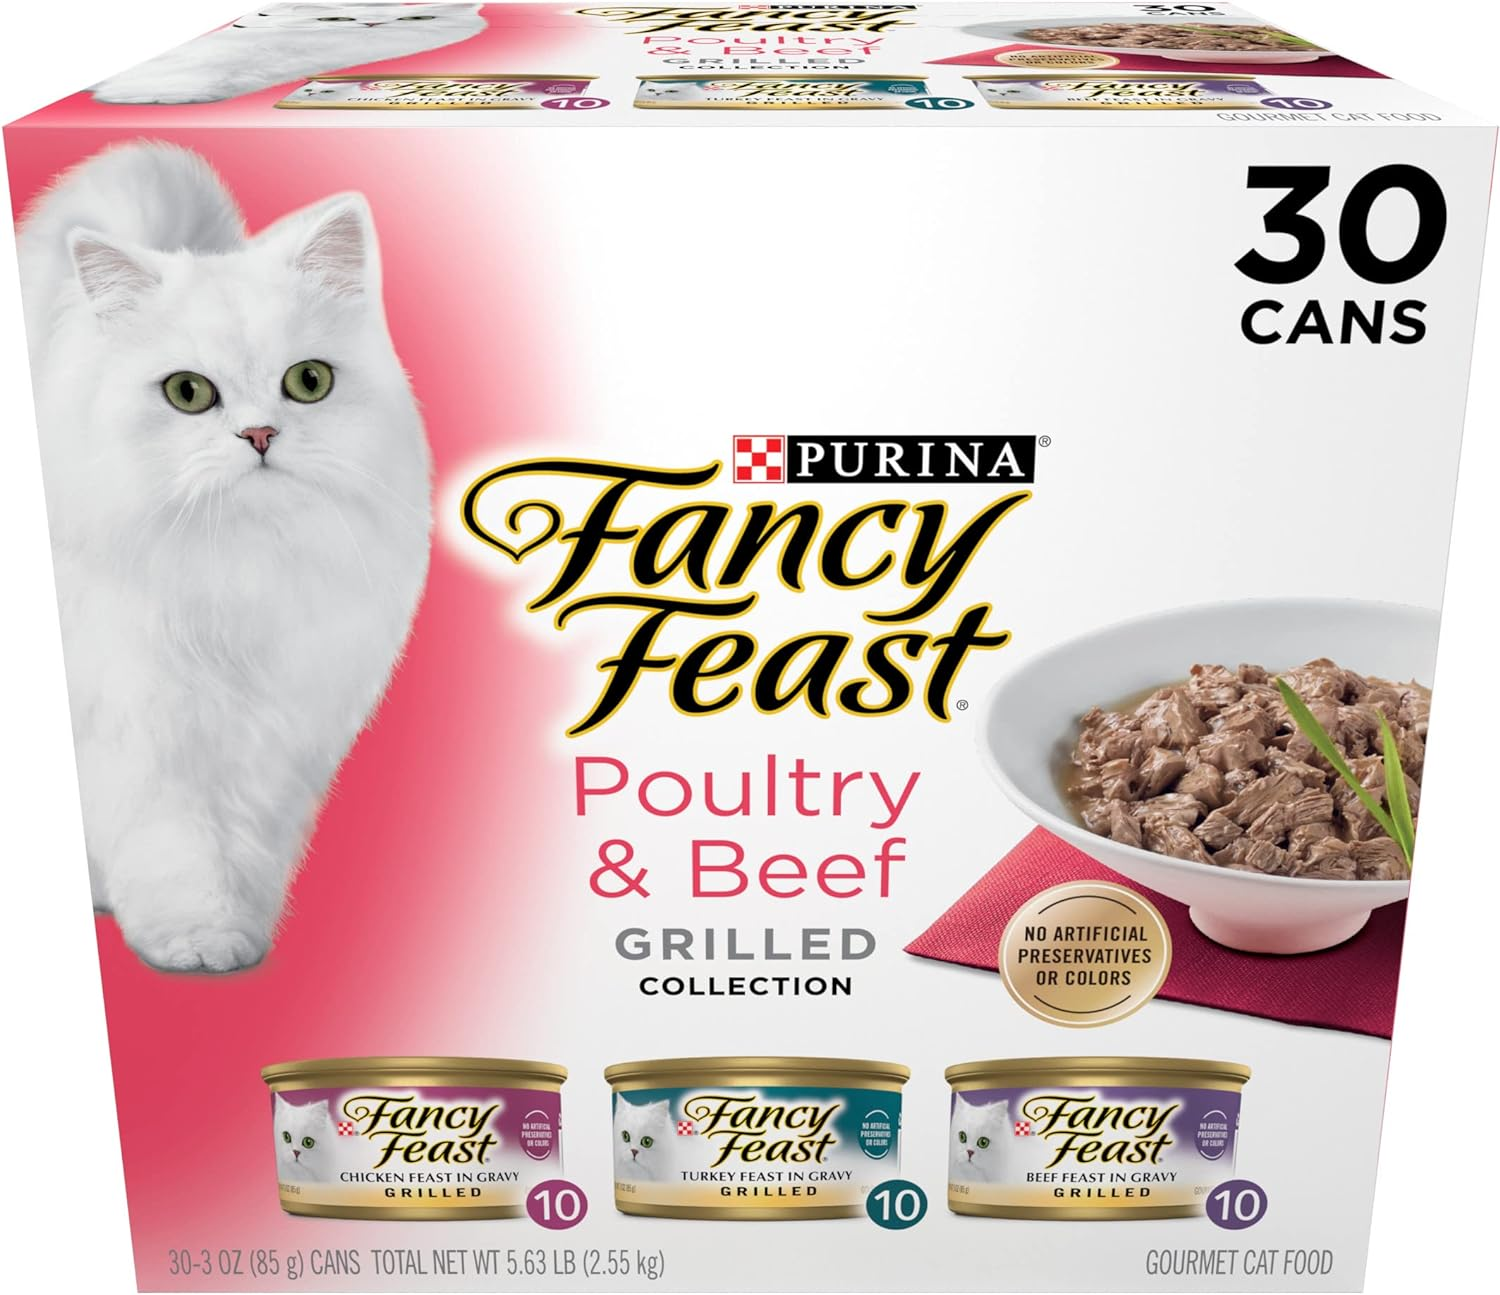 Purina Fancy Feast Grilled Wet Cat Food Poultry and Beef Collection Wet Cat Food Variety Pack - 120 cans + 16 oz treats $101.28 - $30 credit $101.28 or less